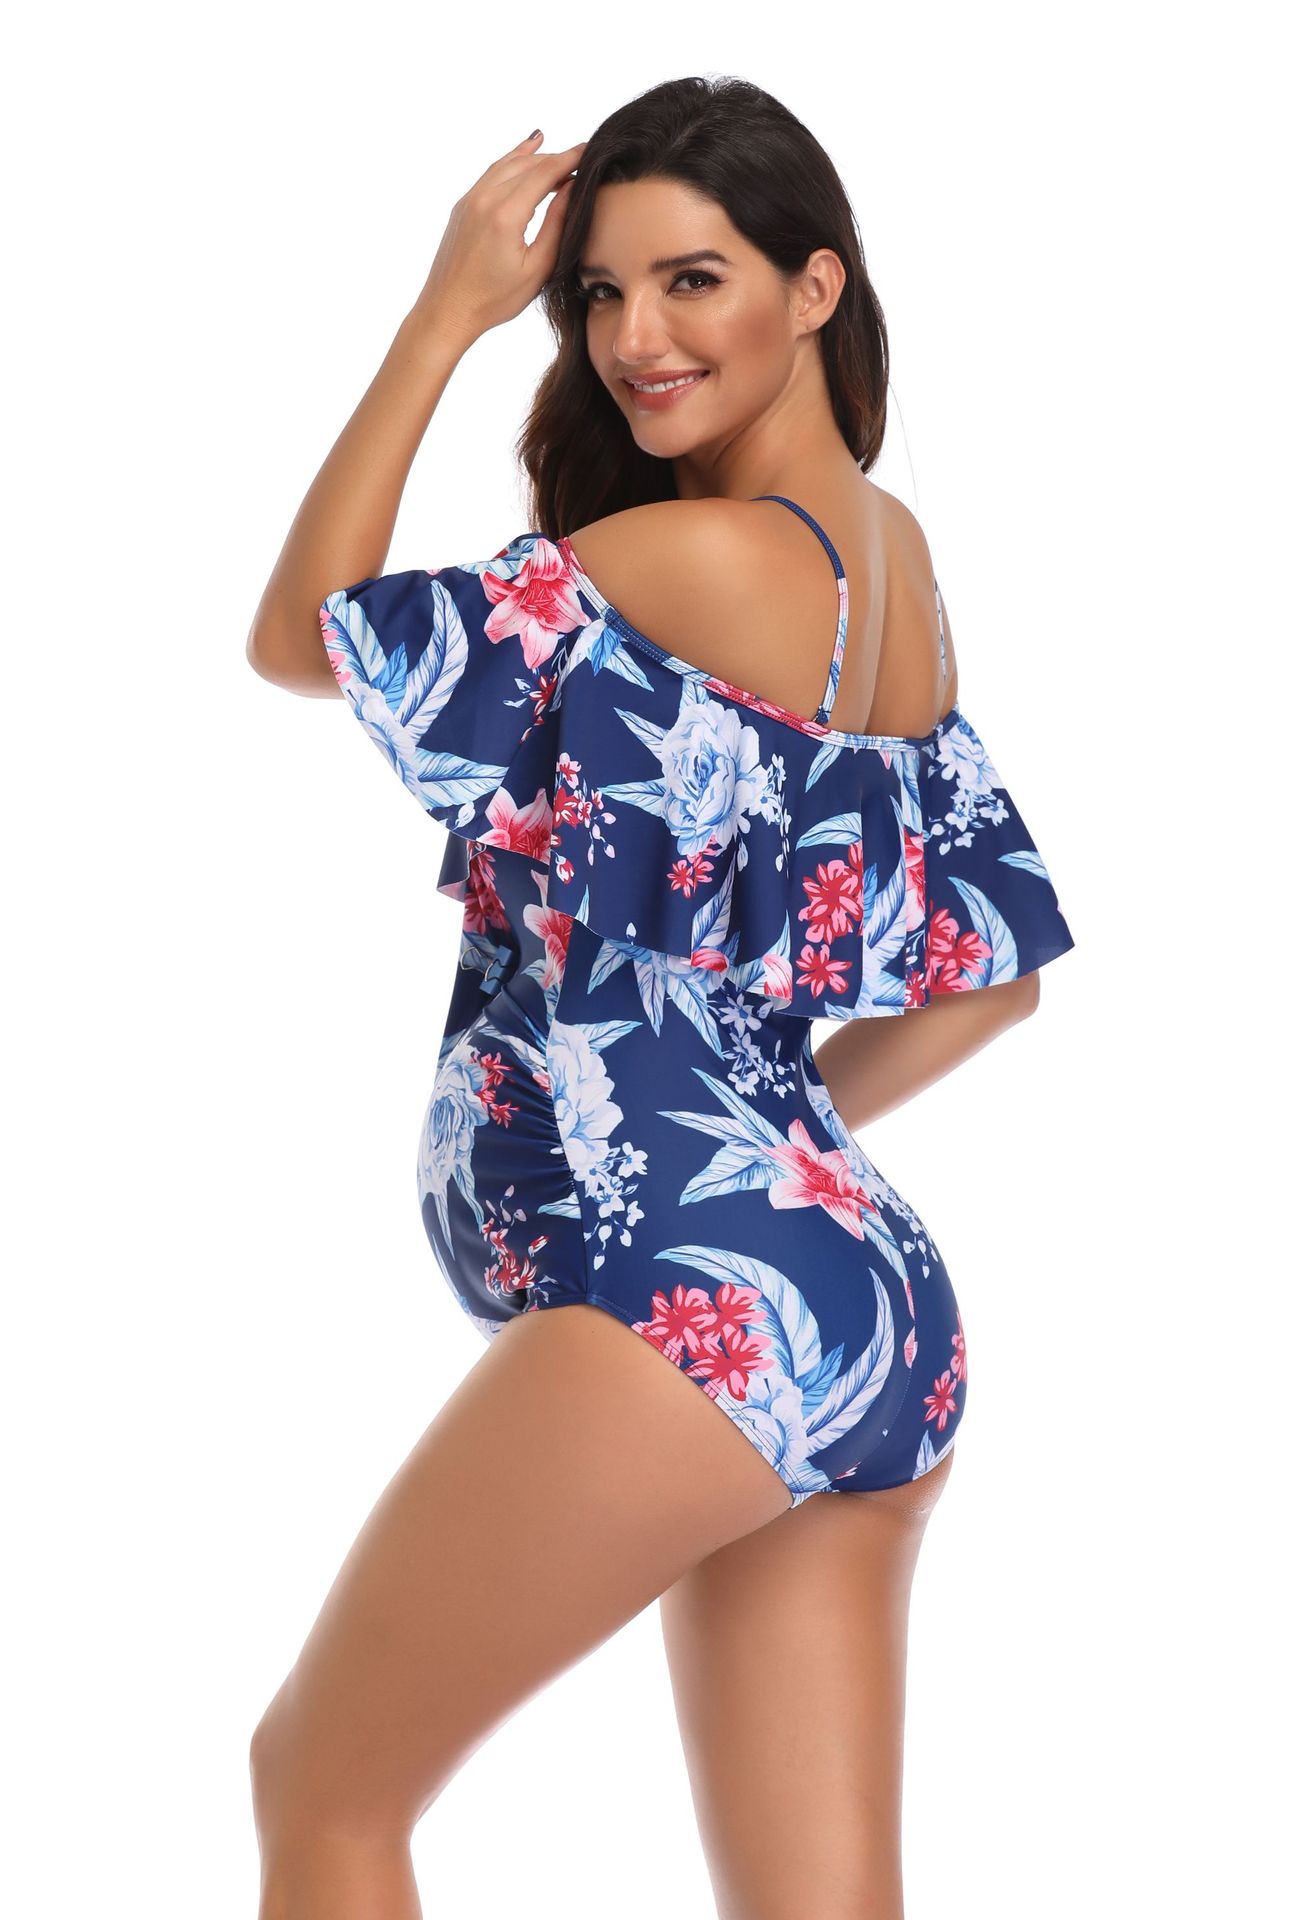 46b5bc10 38d2 4446 9f41 d7ee2d54bea0 Printed maternity swimsuit